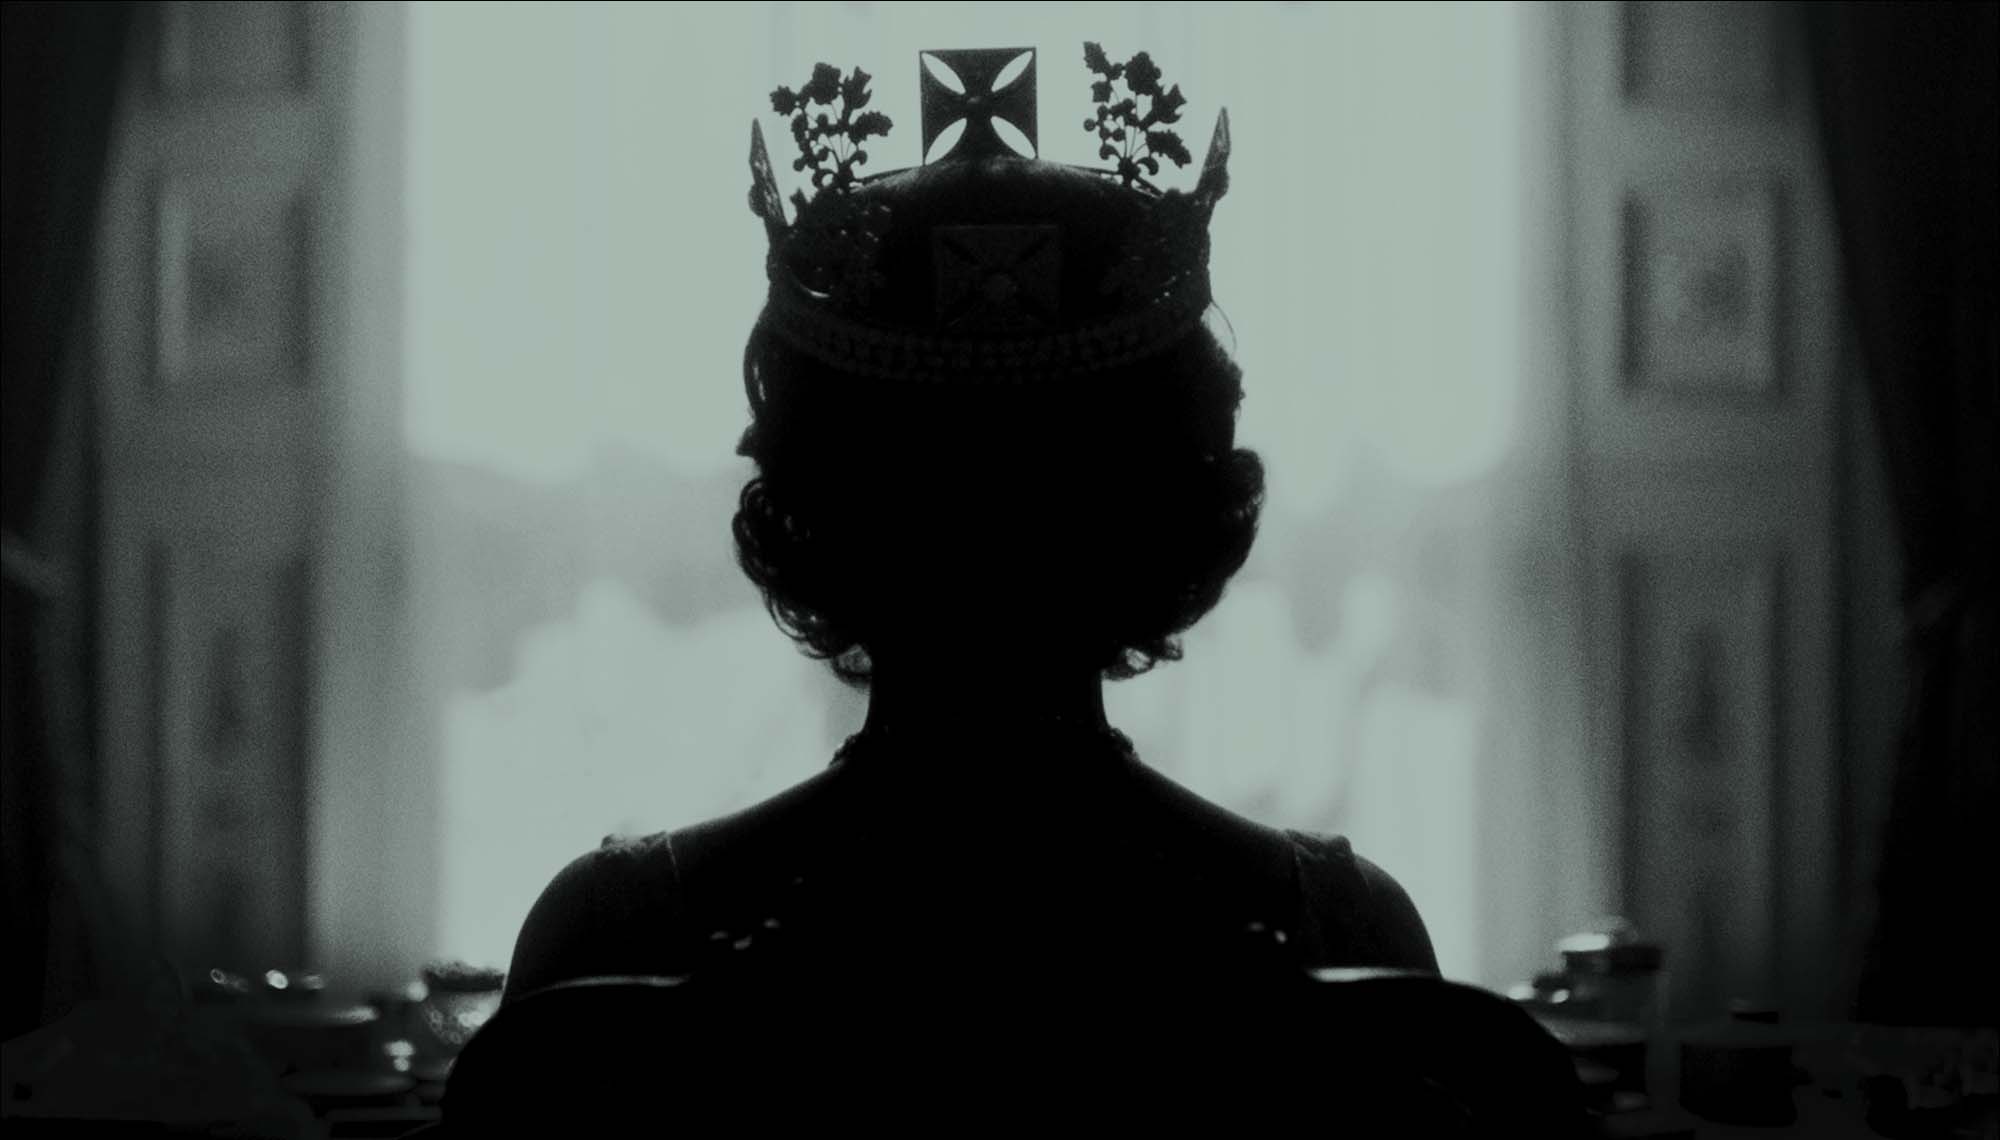 The Crown': The History Behind Season 2 on Netflix - The New York